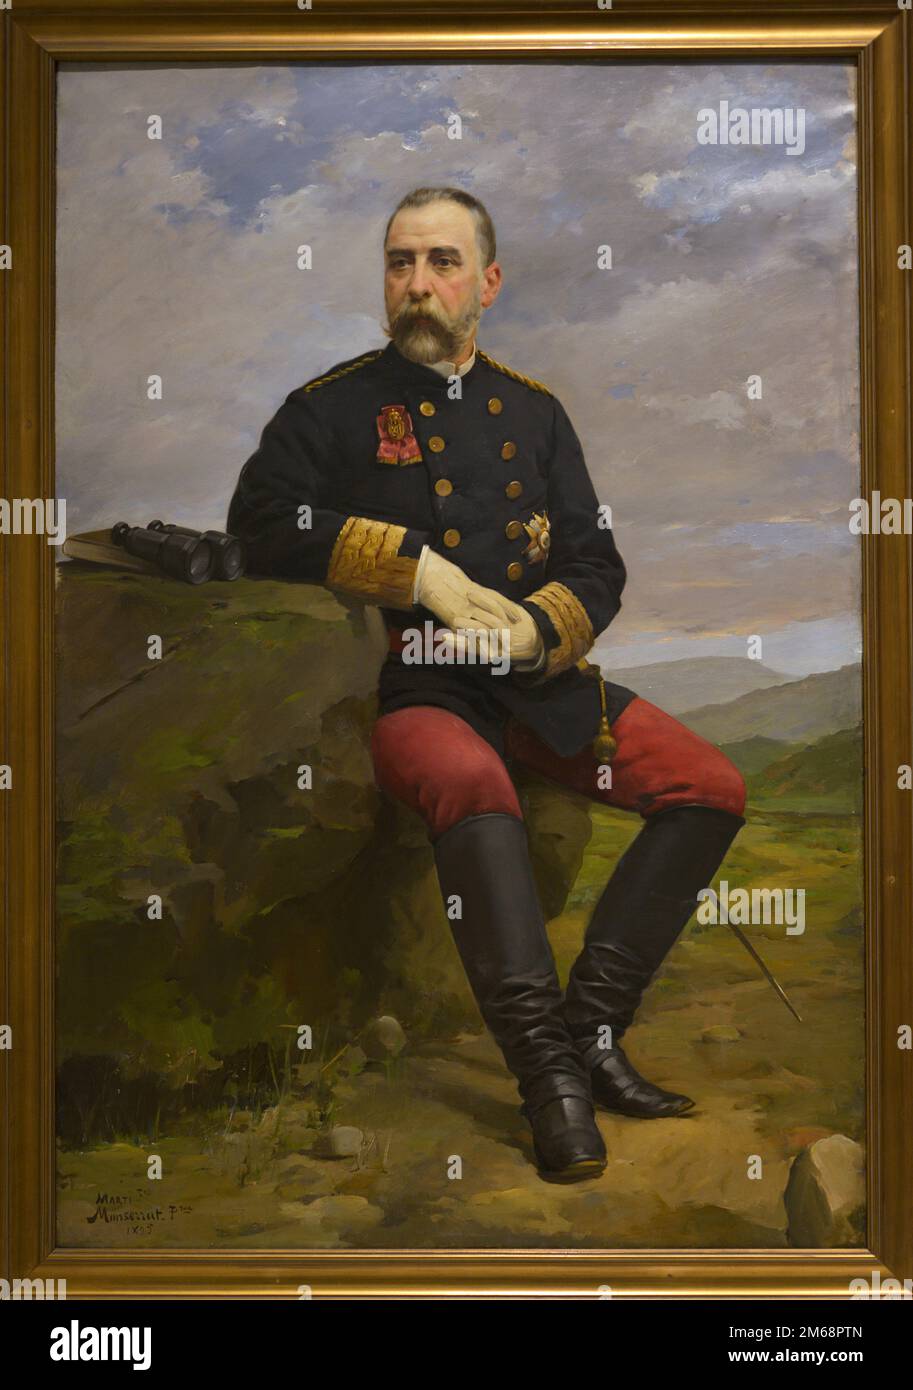 Ramon Blanco y Erenas (1833-1906). 1st Marquis of Peña Plata. Spanish military, last Captain-General of the island of Cuba. Portrait by F. Martin Montserrat in 1895. Oil on canvas. Army Museum. Toledo, Spain. Stock Photo